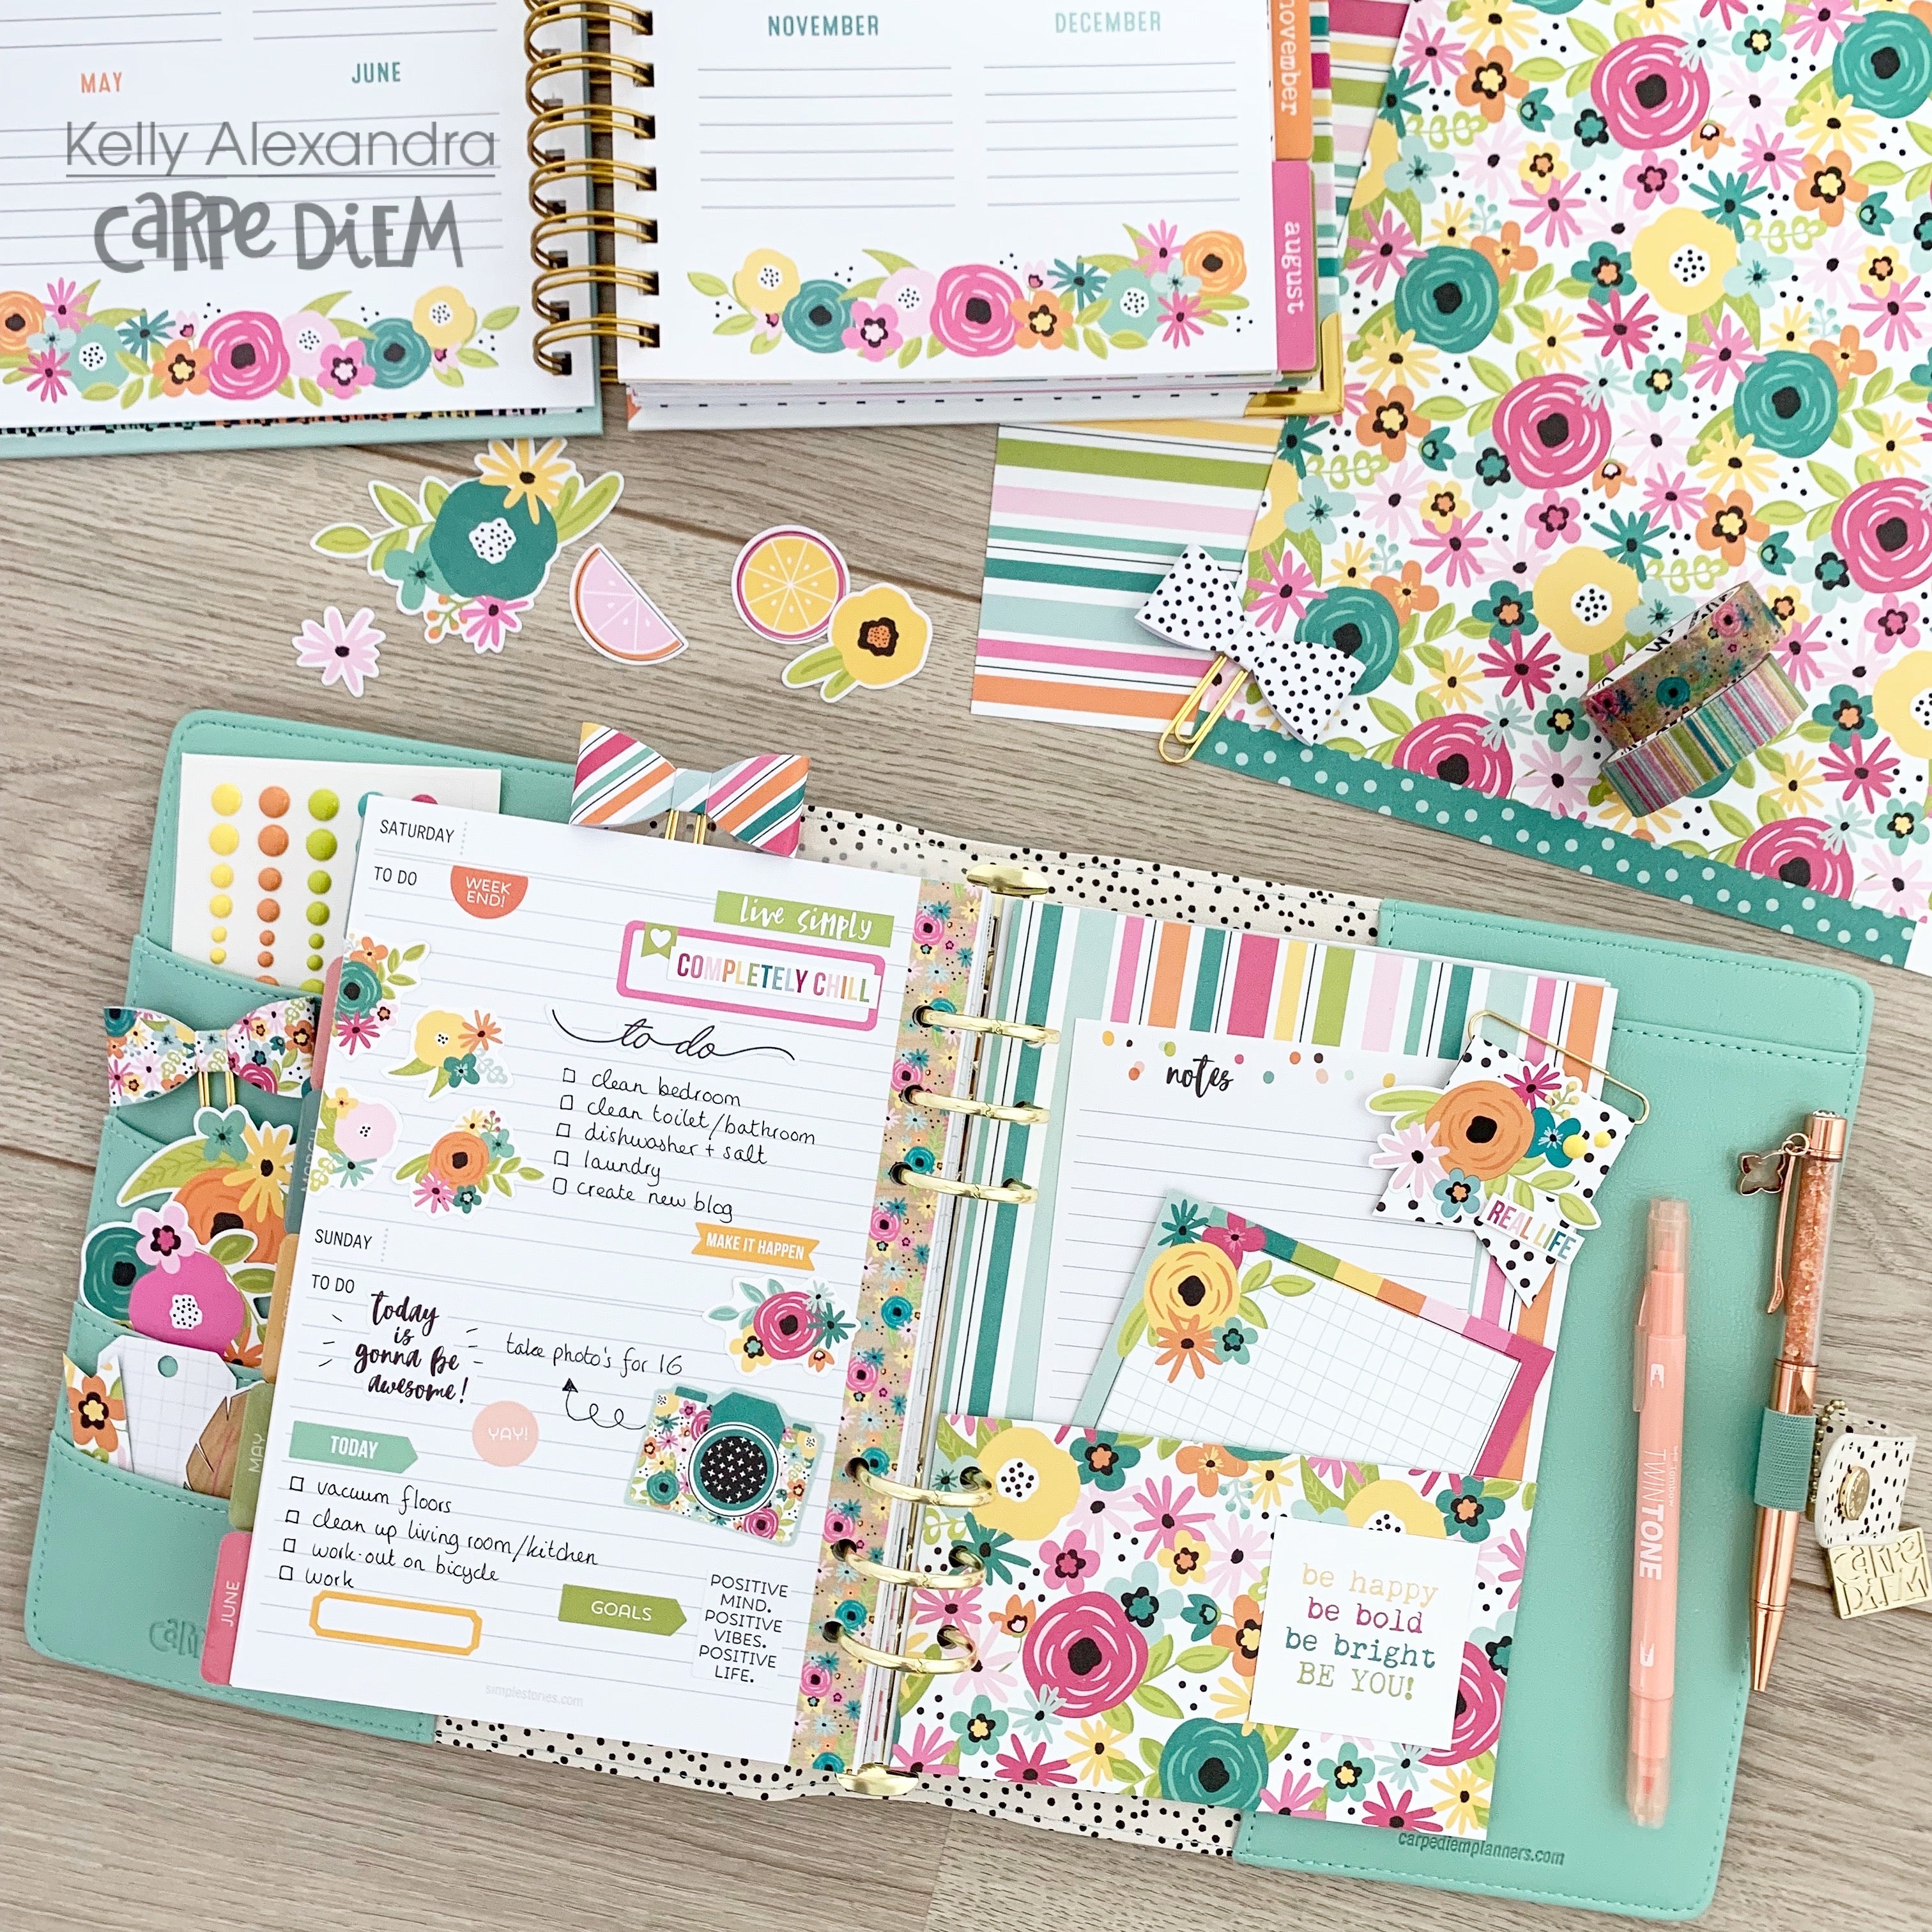 OH Happy Day Daily Planner! – Carpe Diem Planners